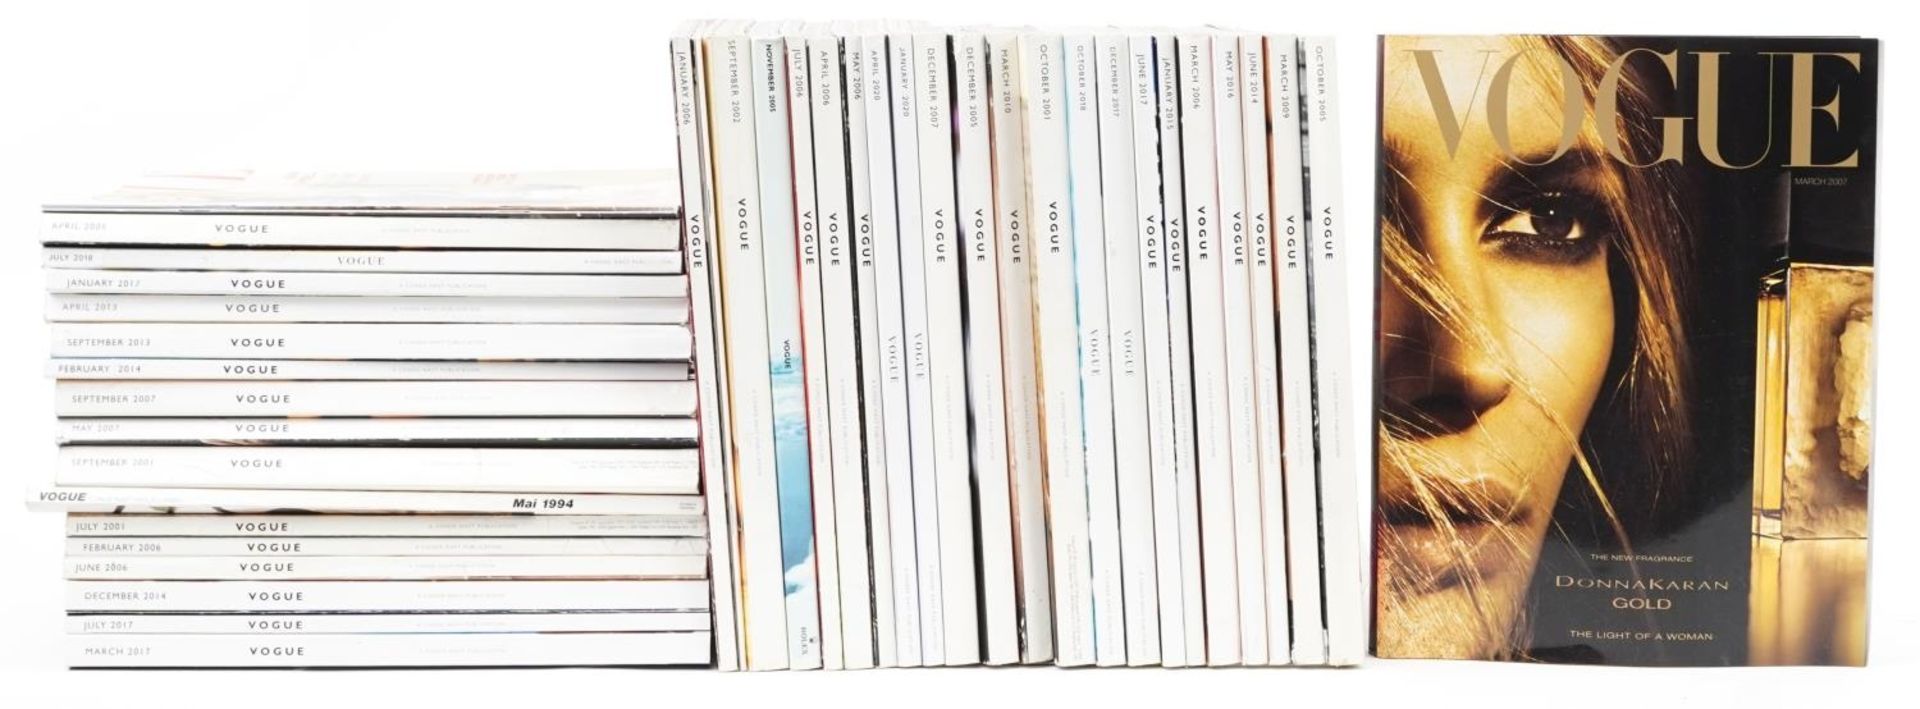 Forty one Vogue photography magazines (PROVENANCE: Estate of Richard Blower) : For further